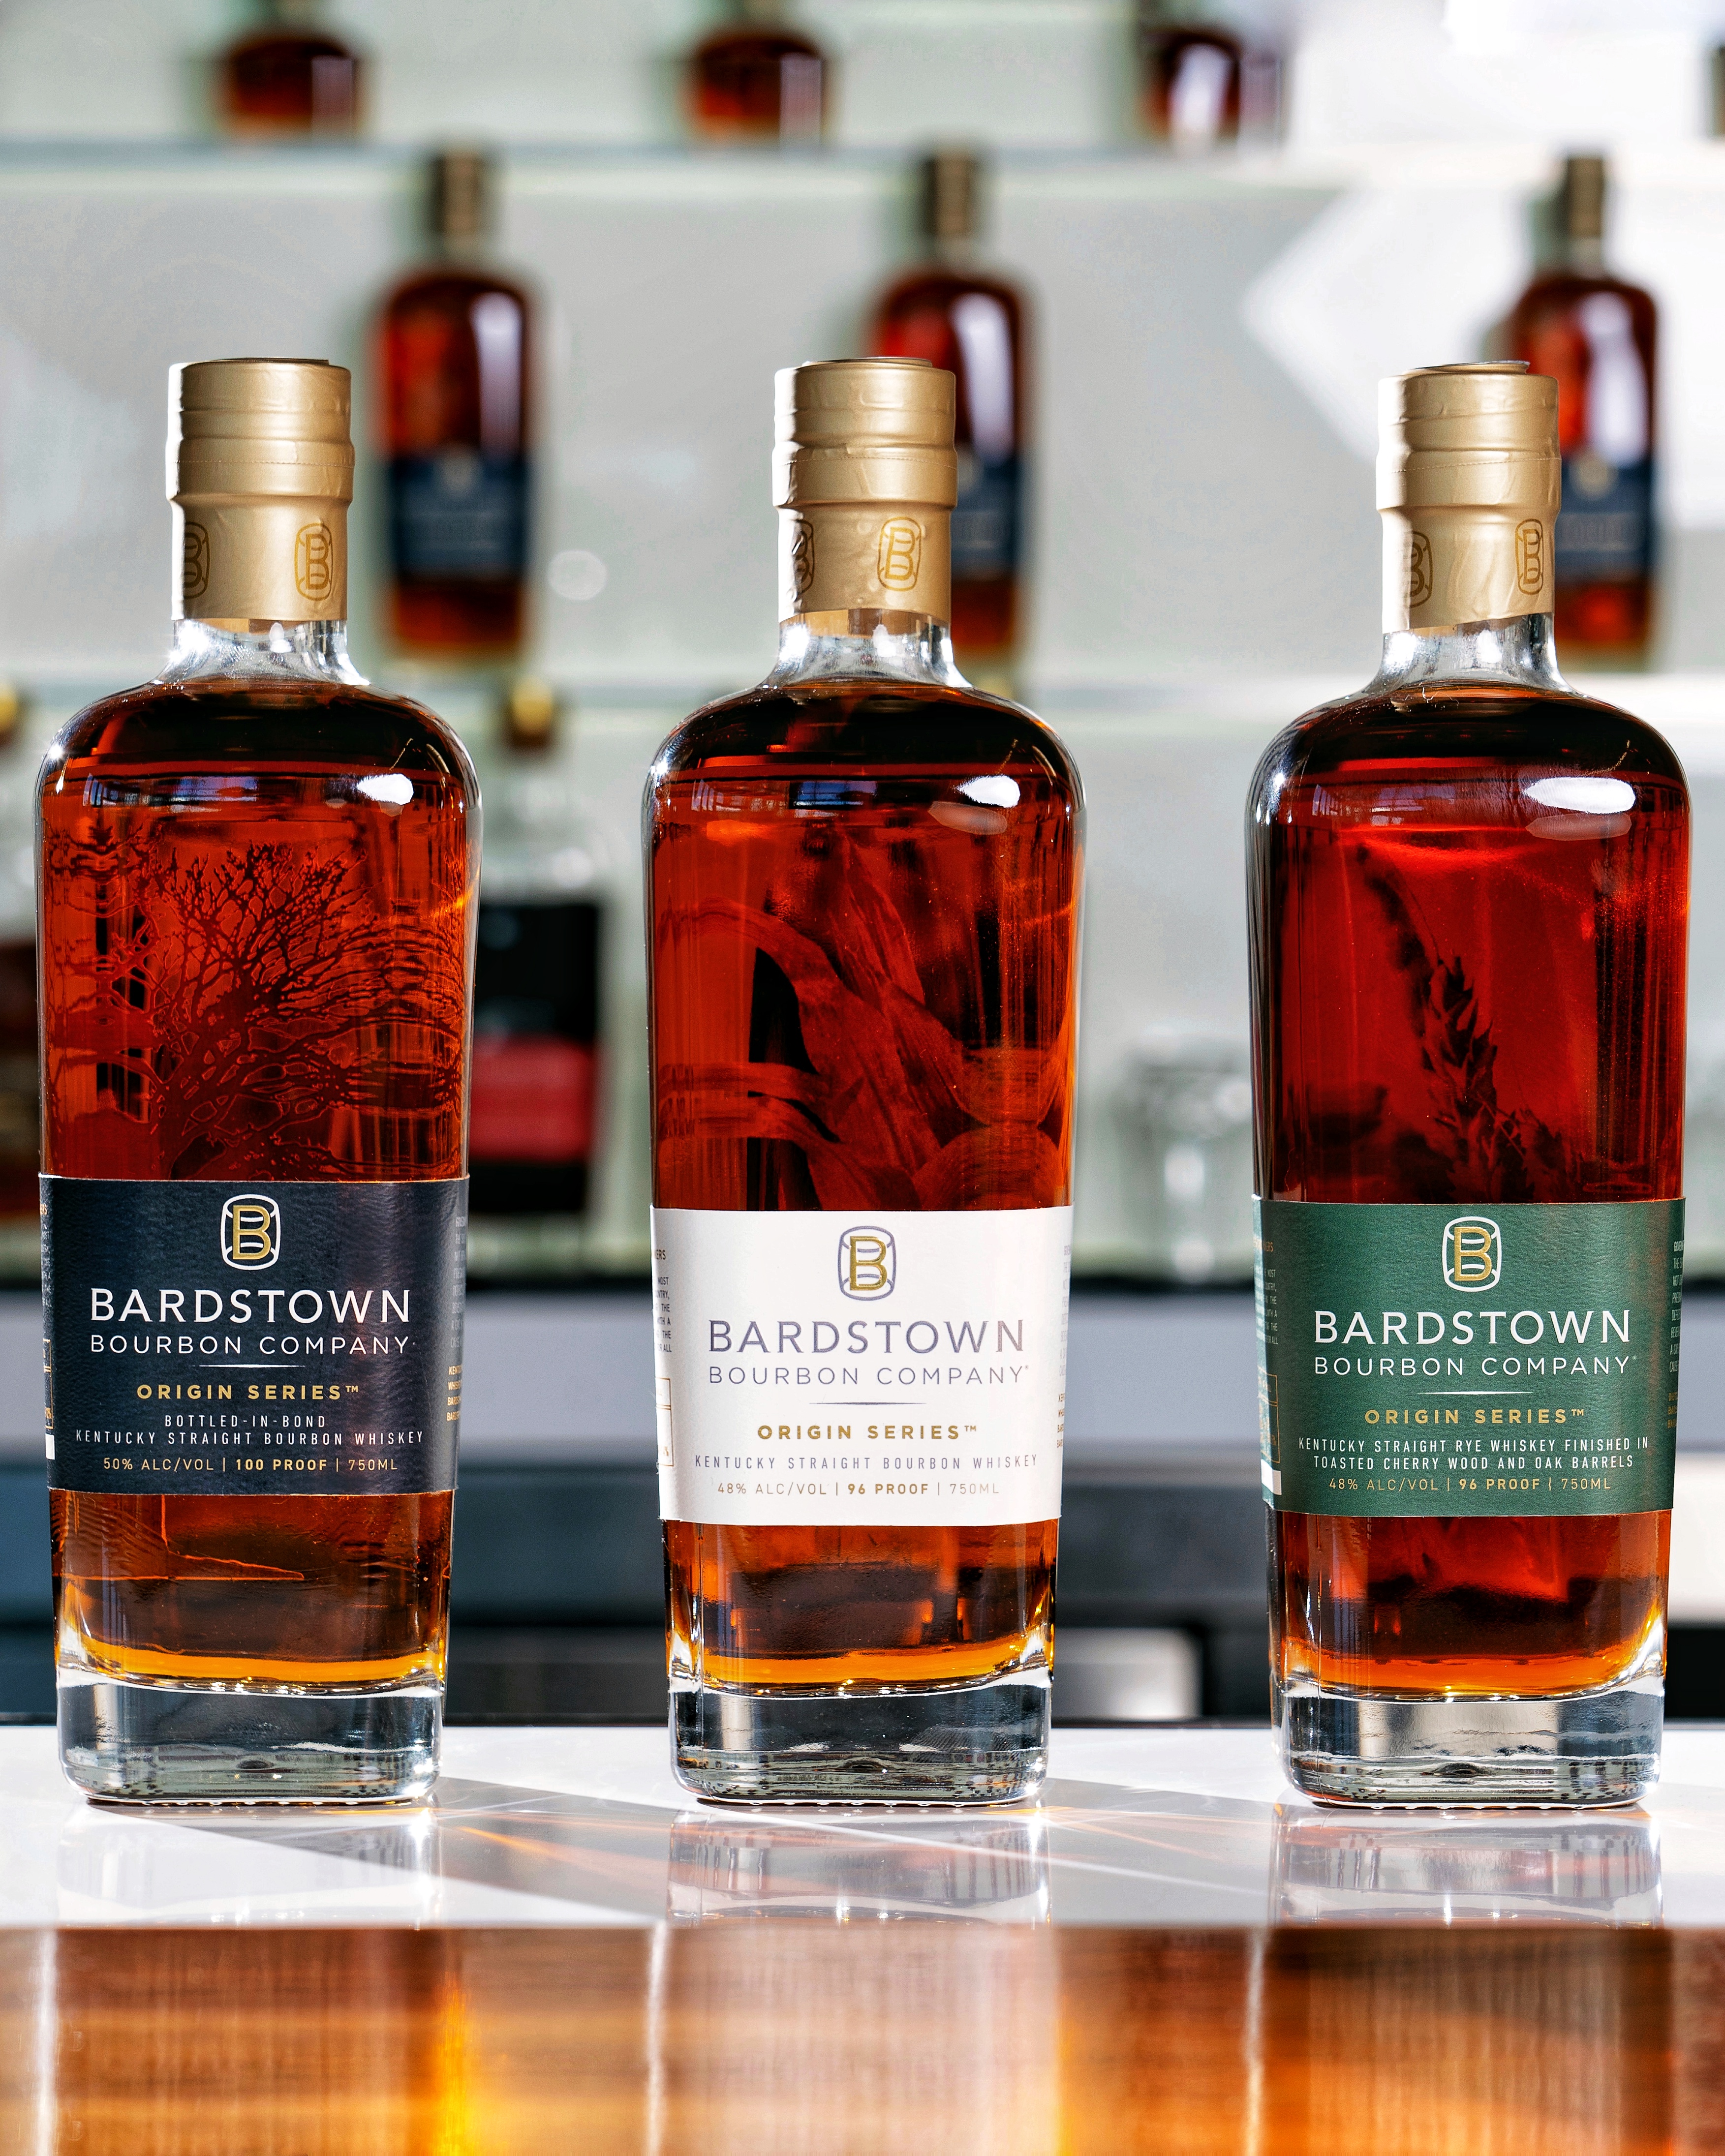 207: The Origin Series from Bardstown Bourbon Company